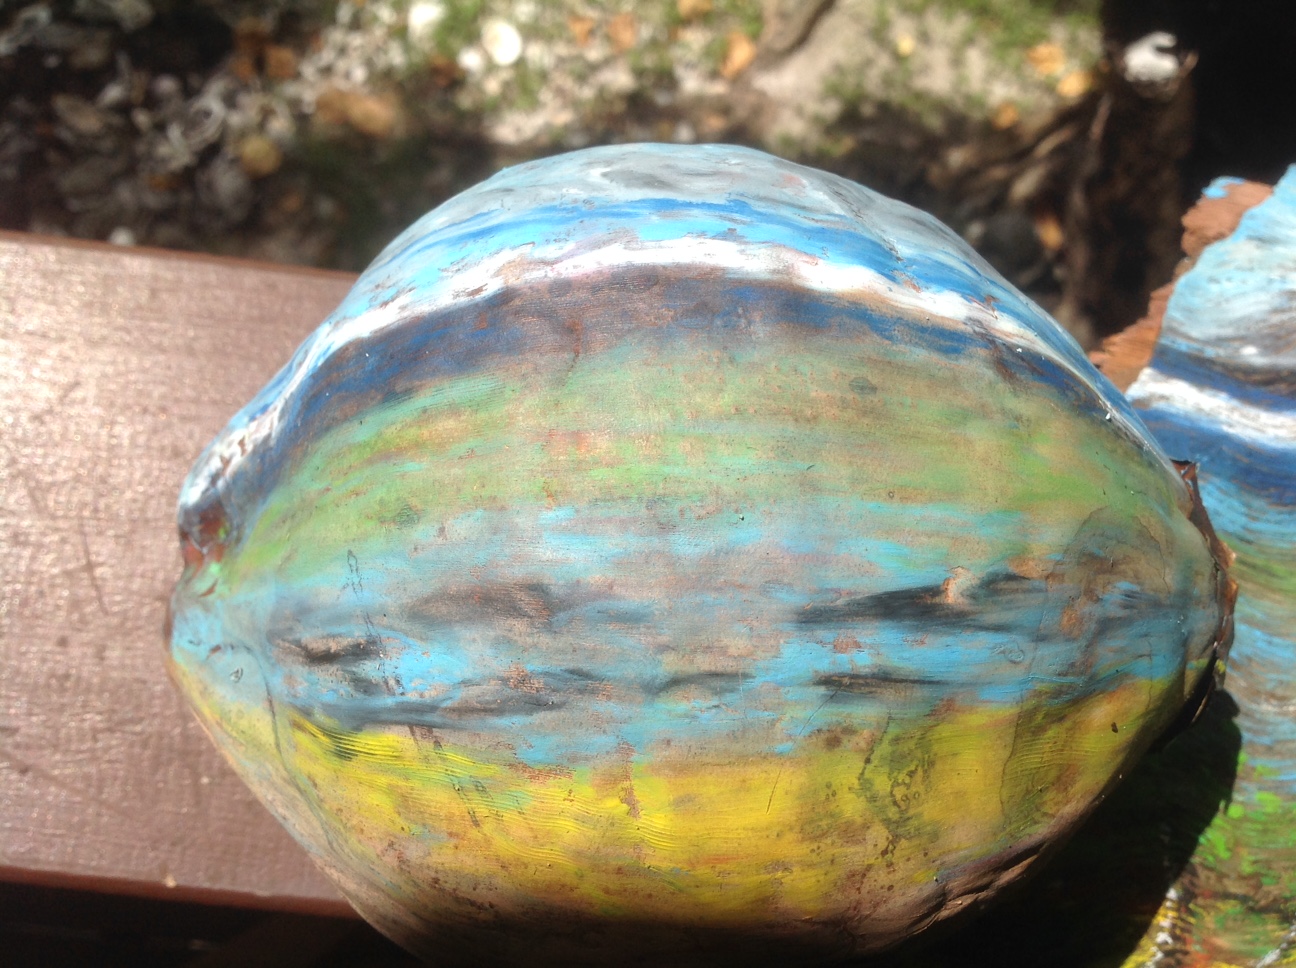 Oil painting on a coconut seascape